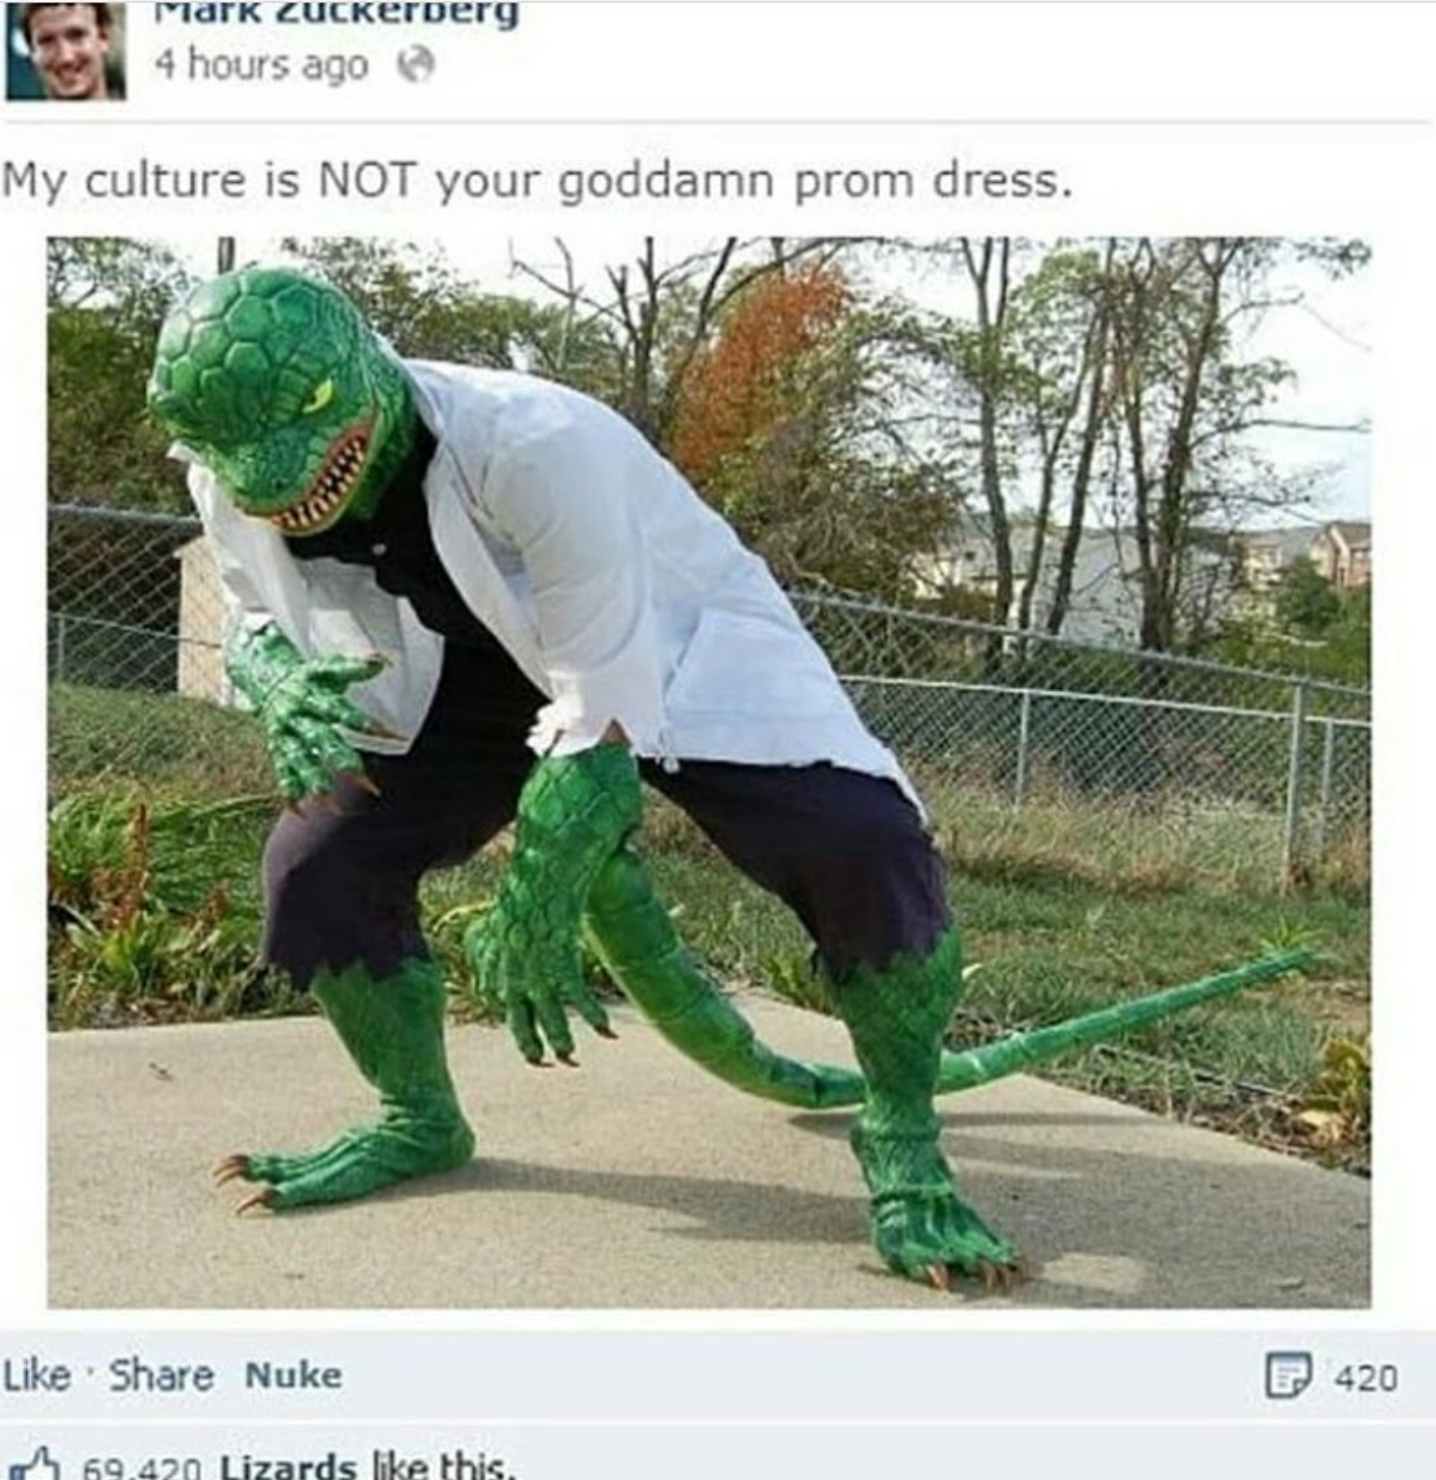 Mark Zuckerberg 4 hours ago My culture is Not your goddamn prom dress. Nuke 420 h 69.420 Lizards this.